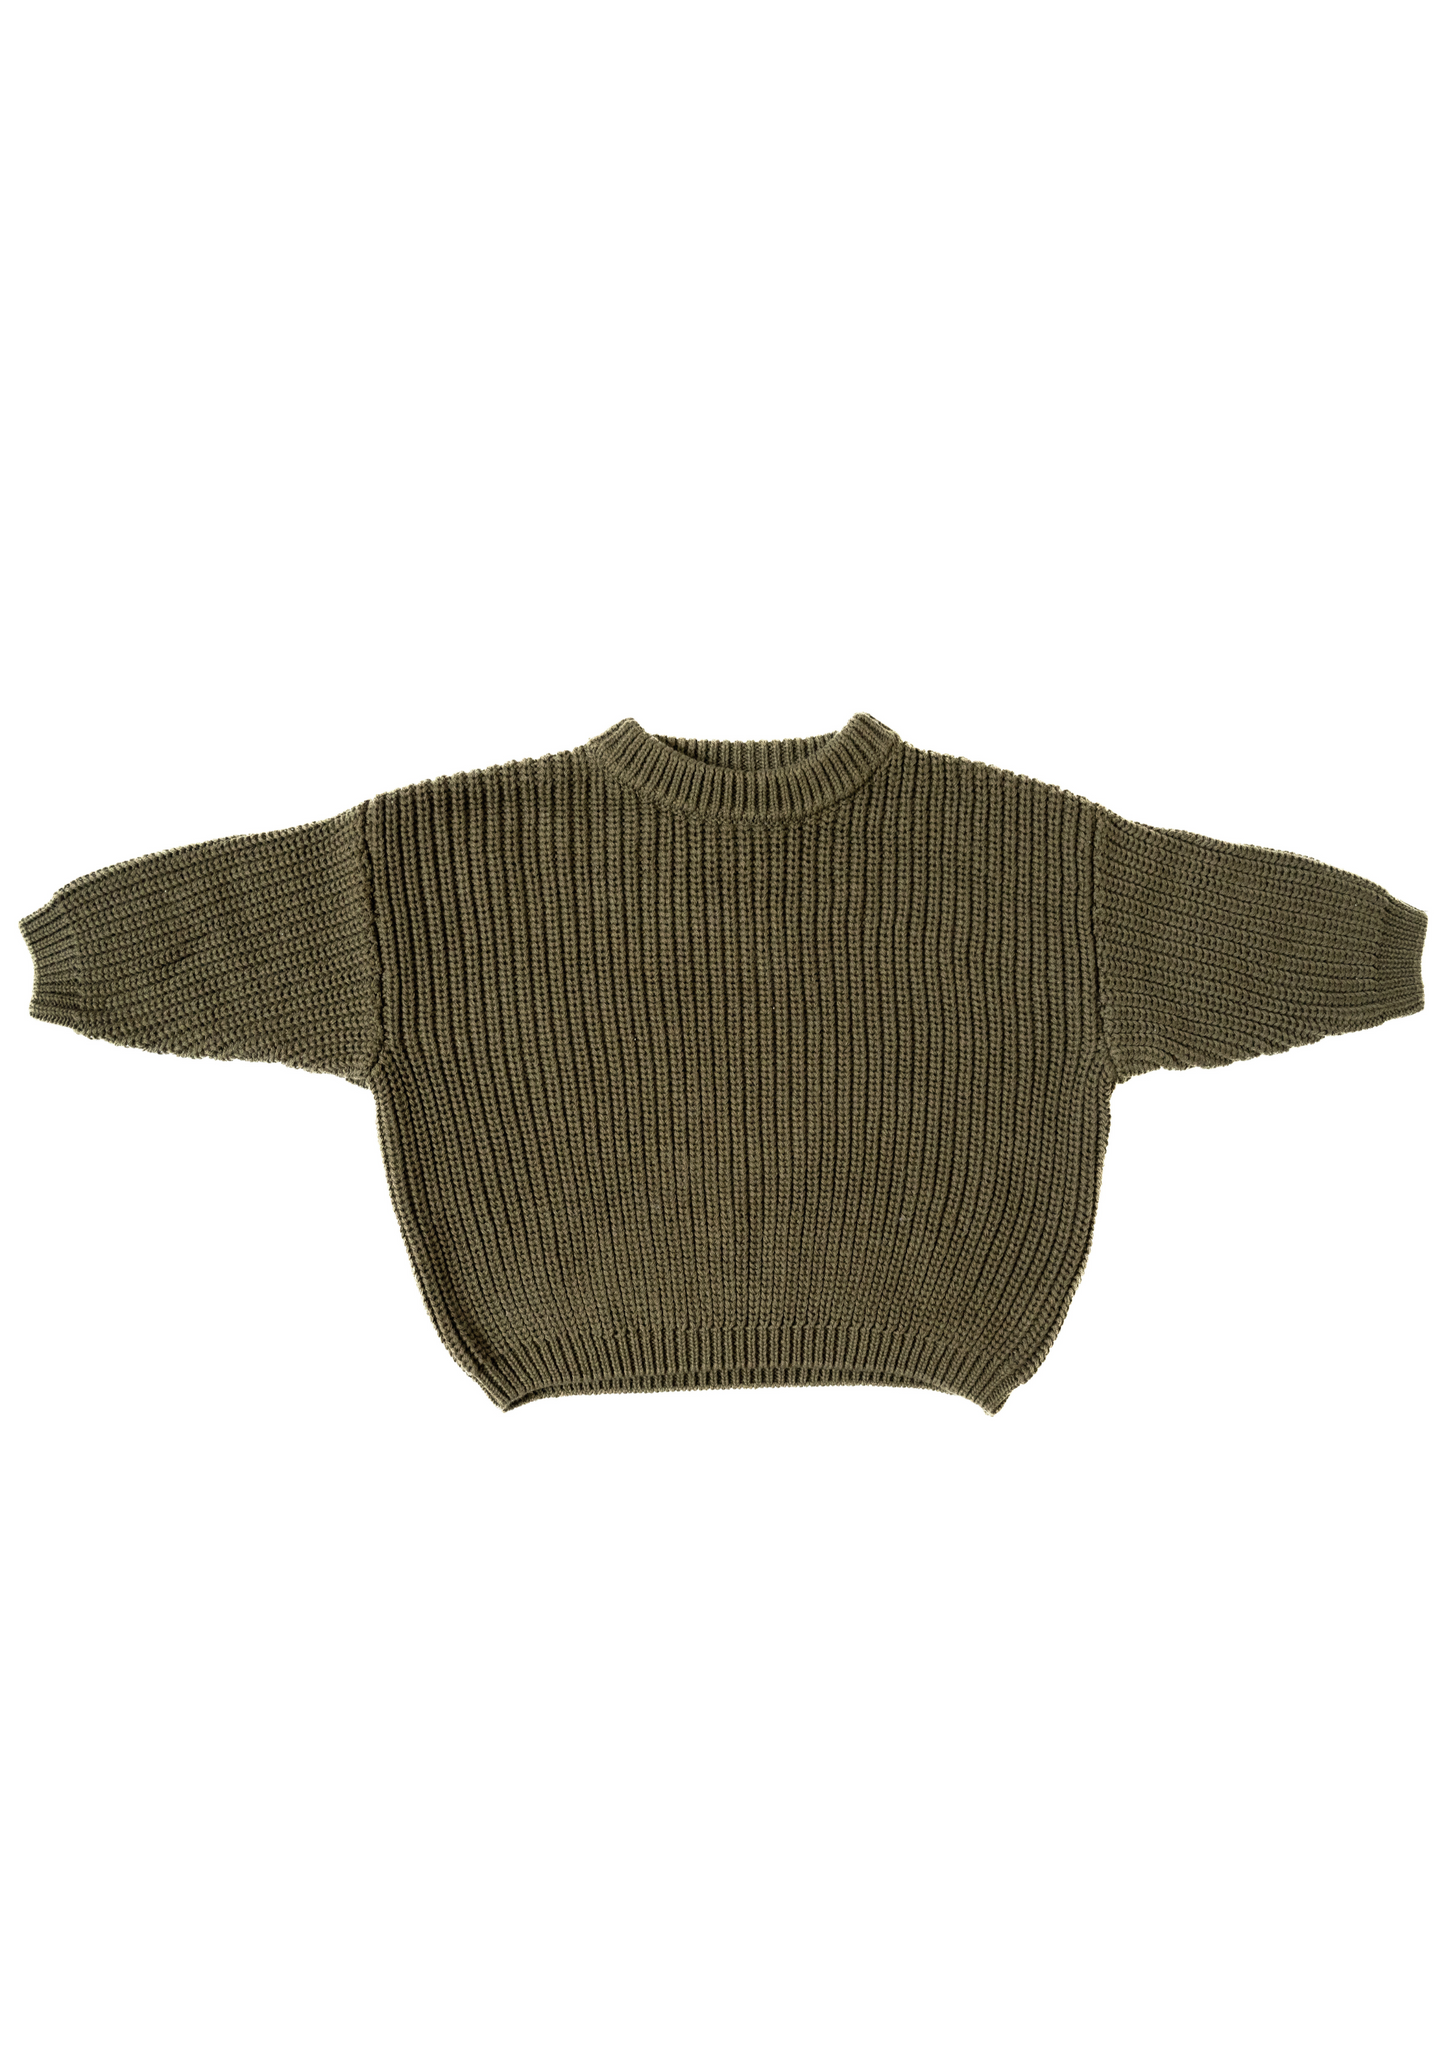 SWEATER IN OLIVE